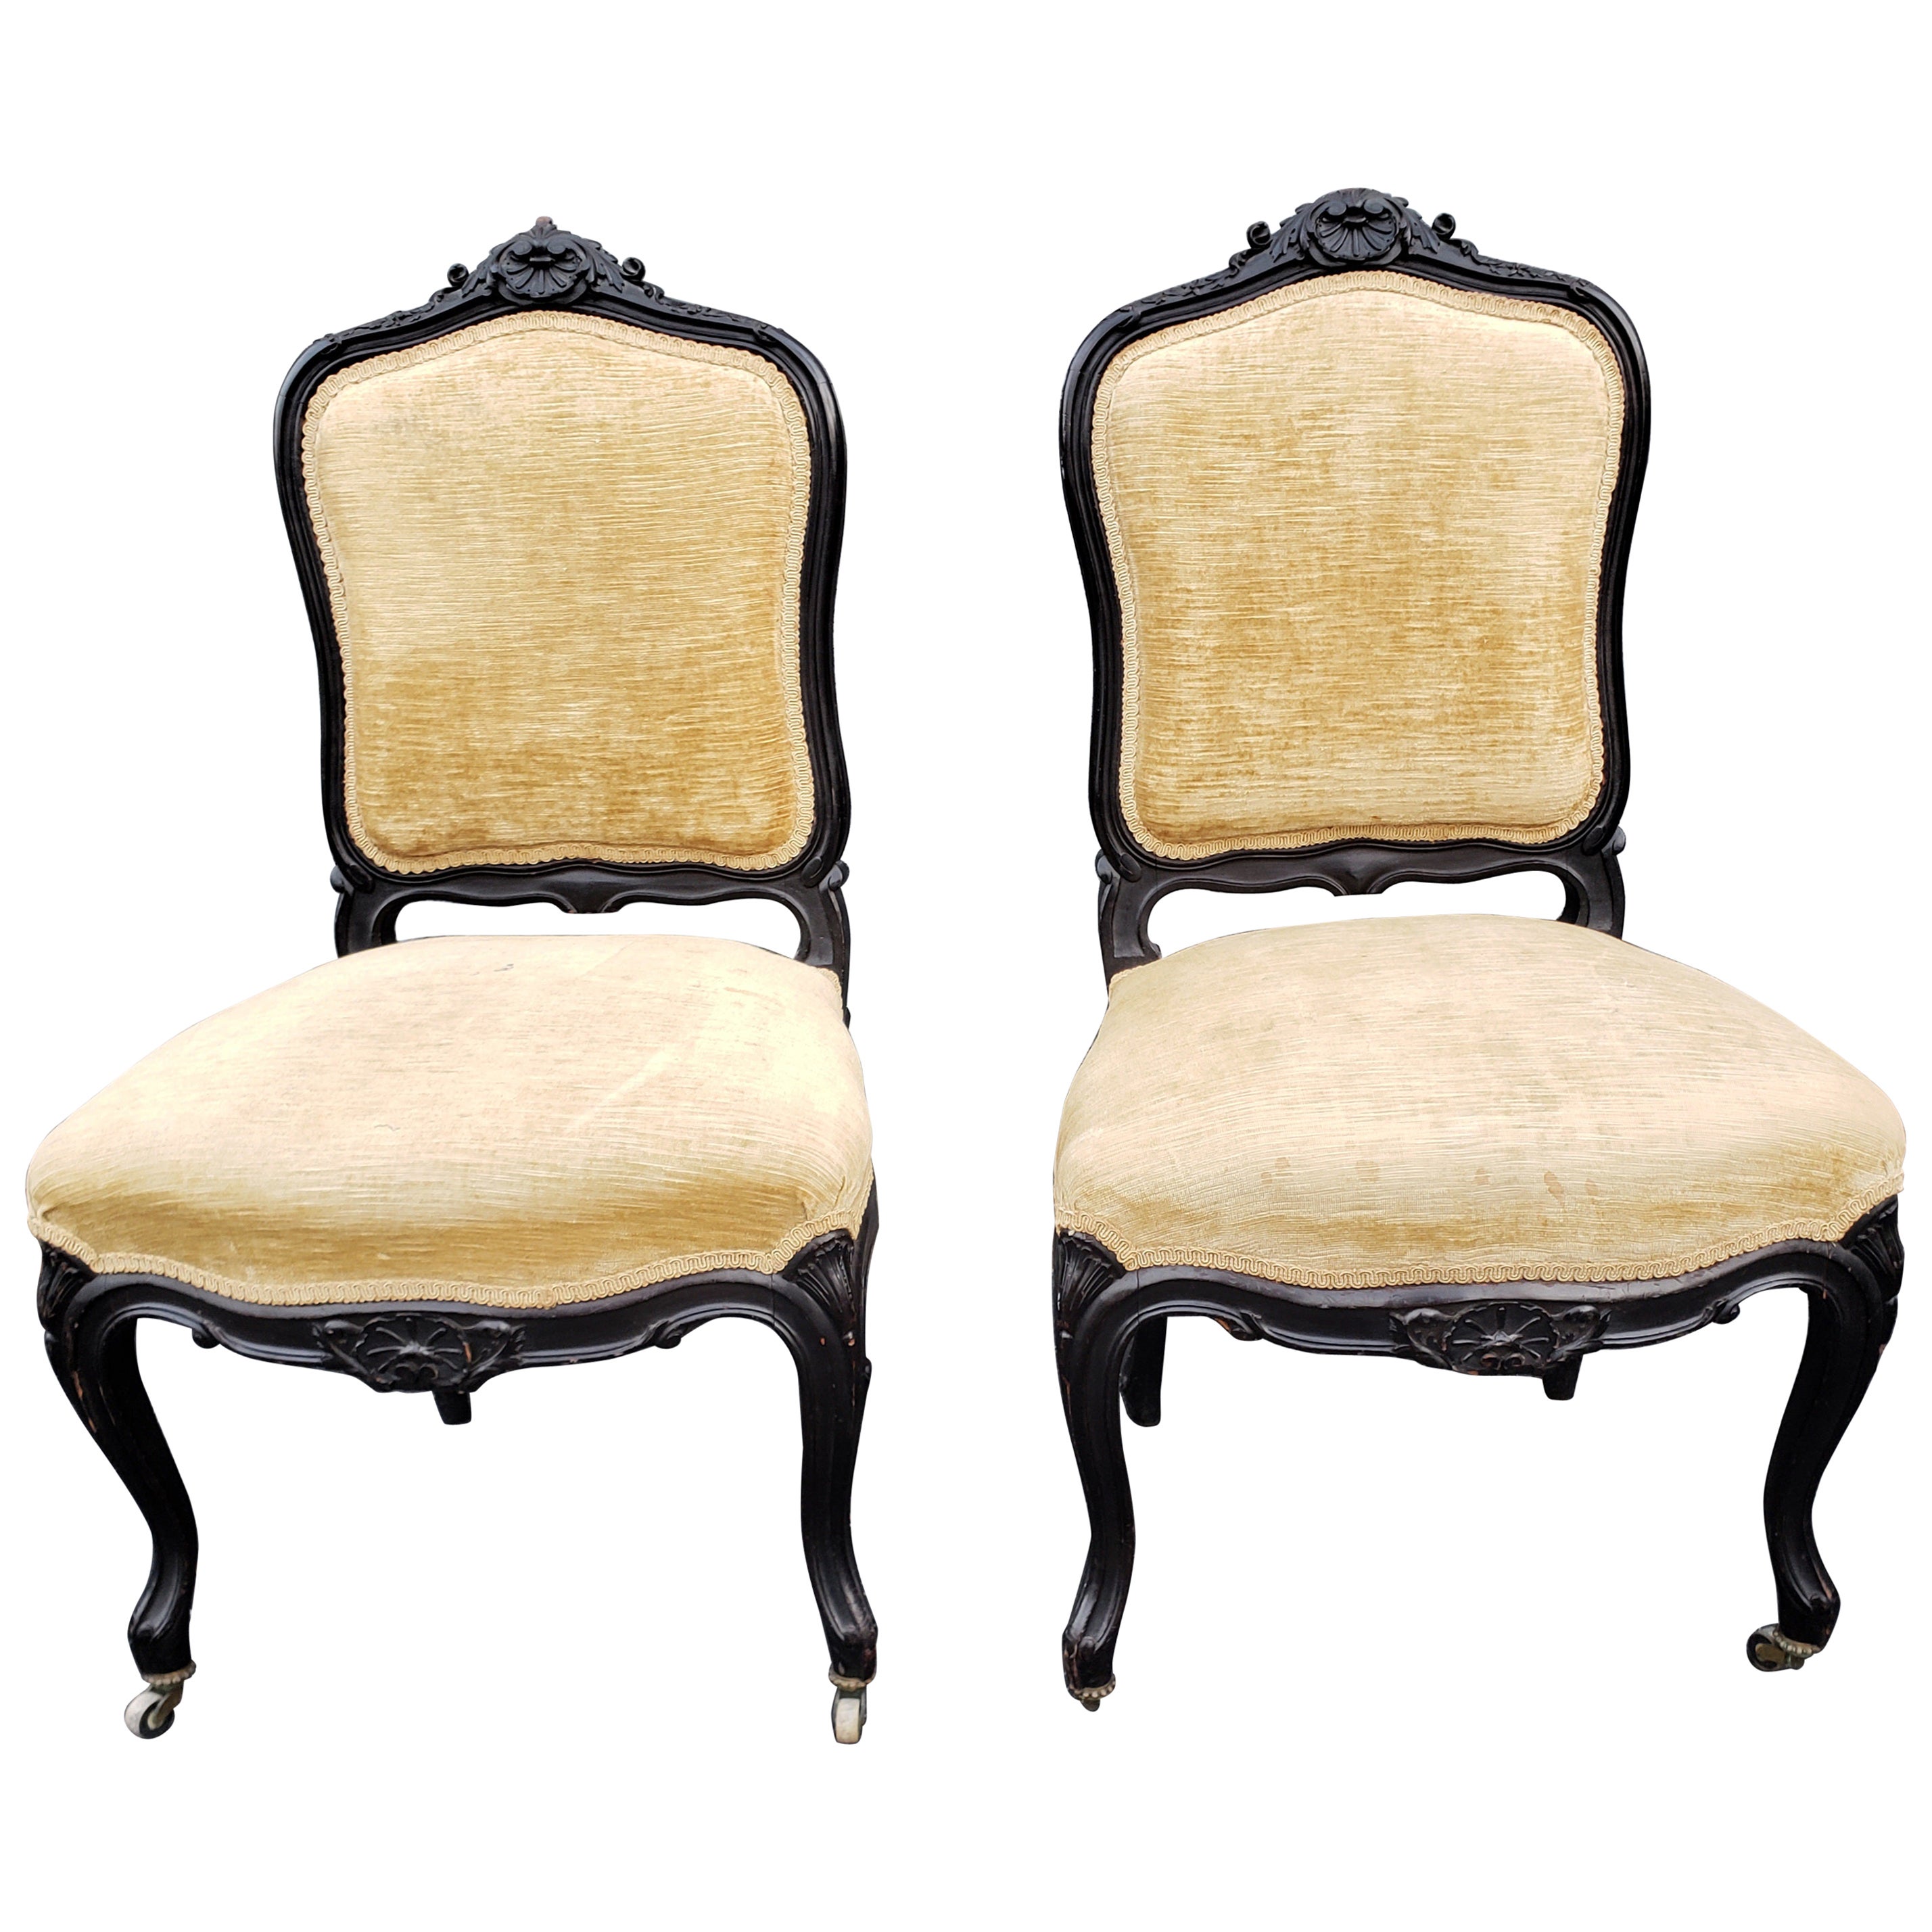 Pair of 1890s Louis XV Carved, Ebonized and Upholstered Chairs